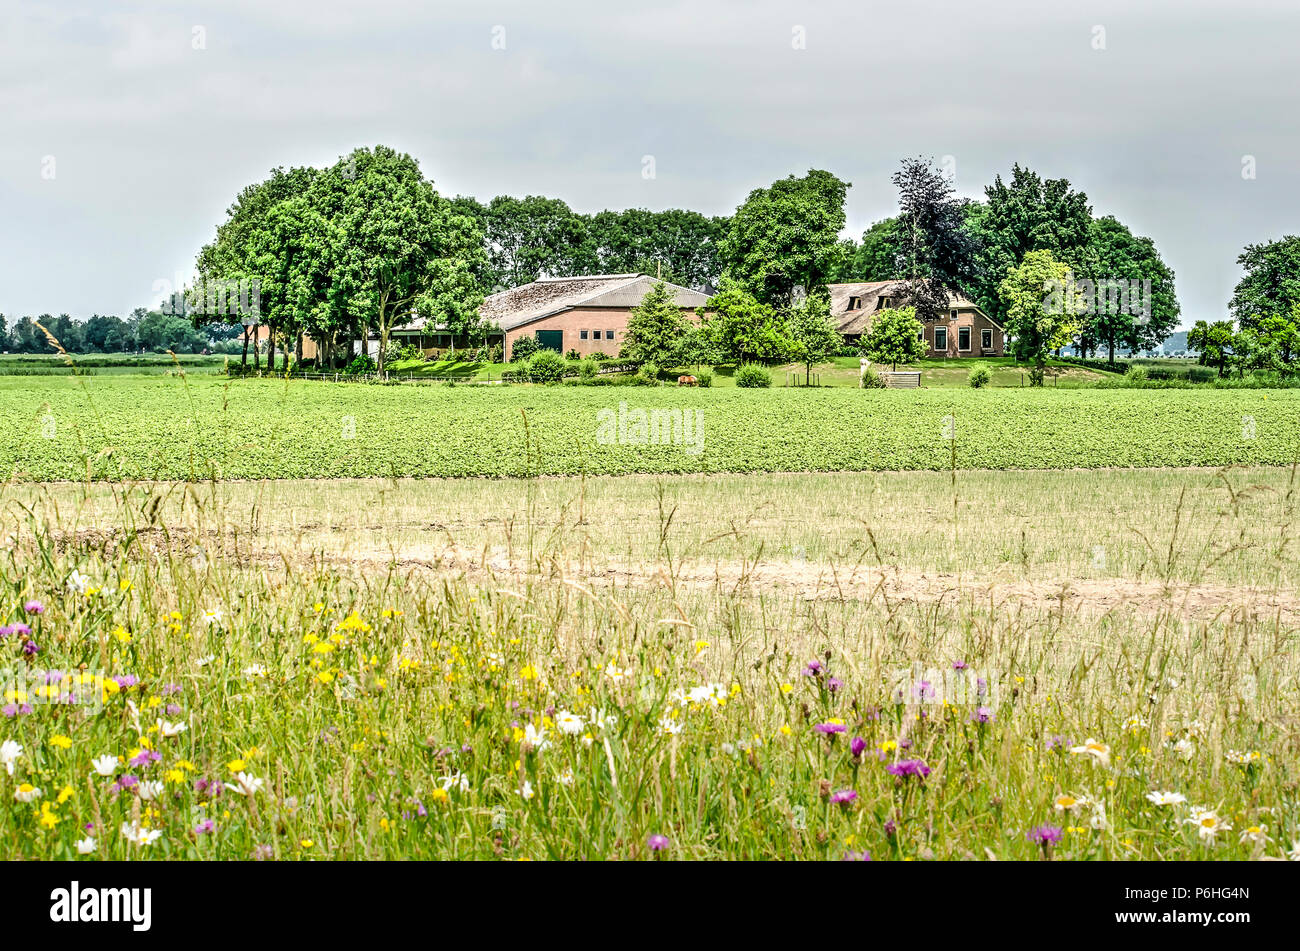 Kampen, The Netherlands, June 9, 2018: The farms on Kampereiland are built on mounds to protect them from potential flooding Stock Photo